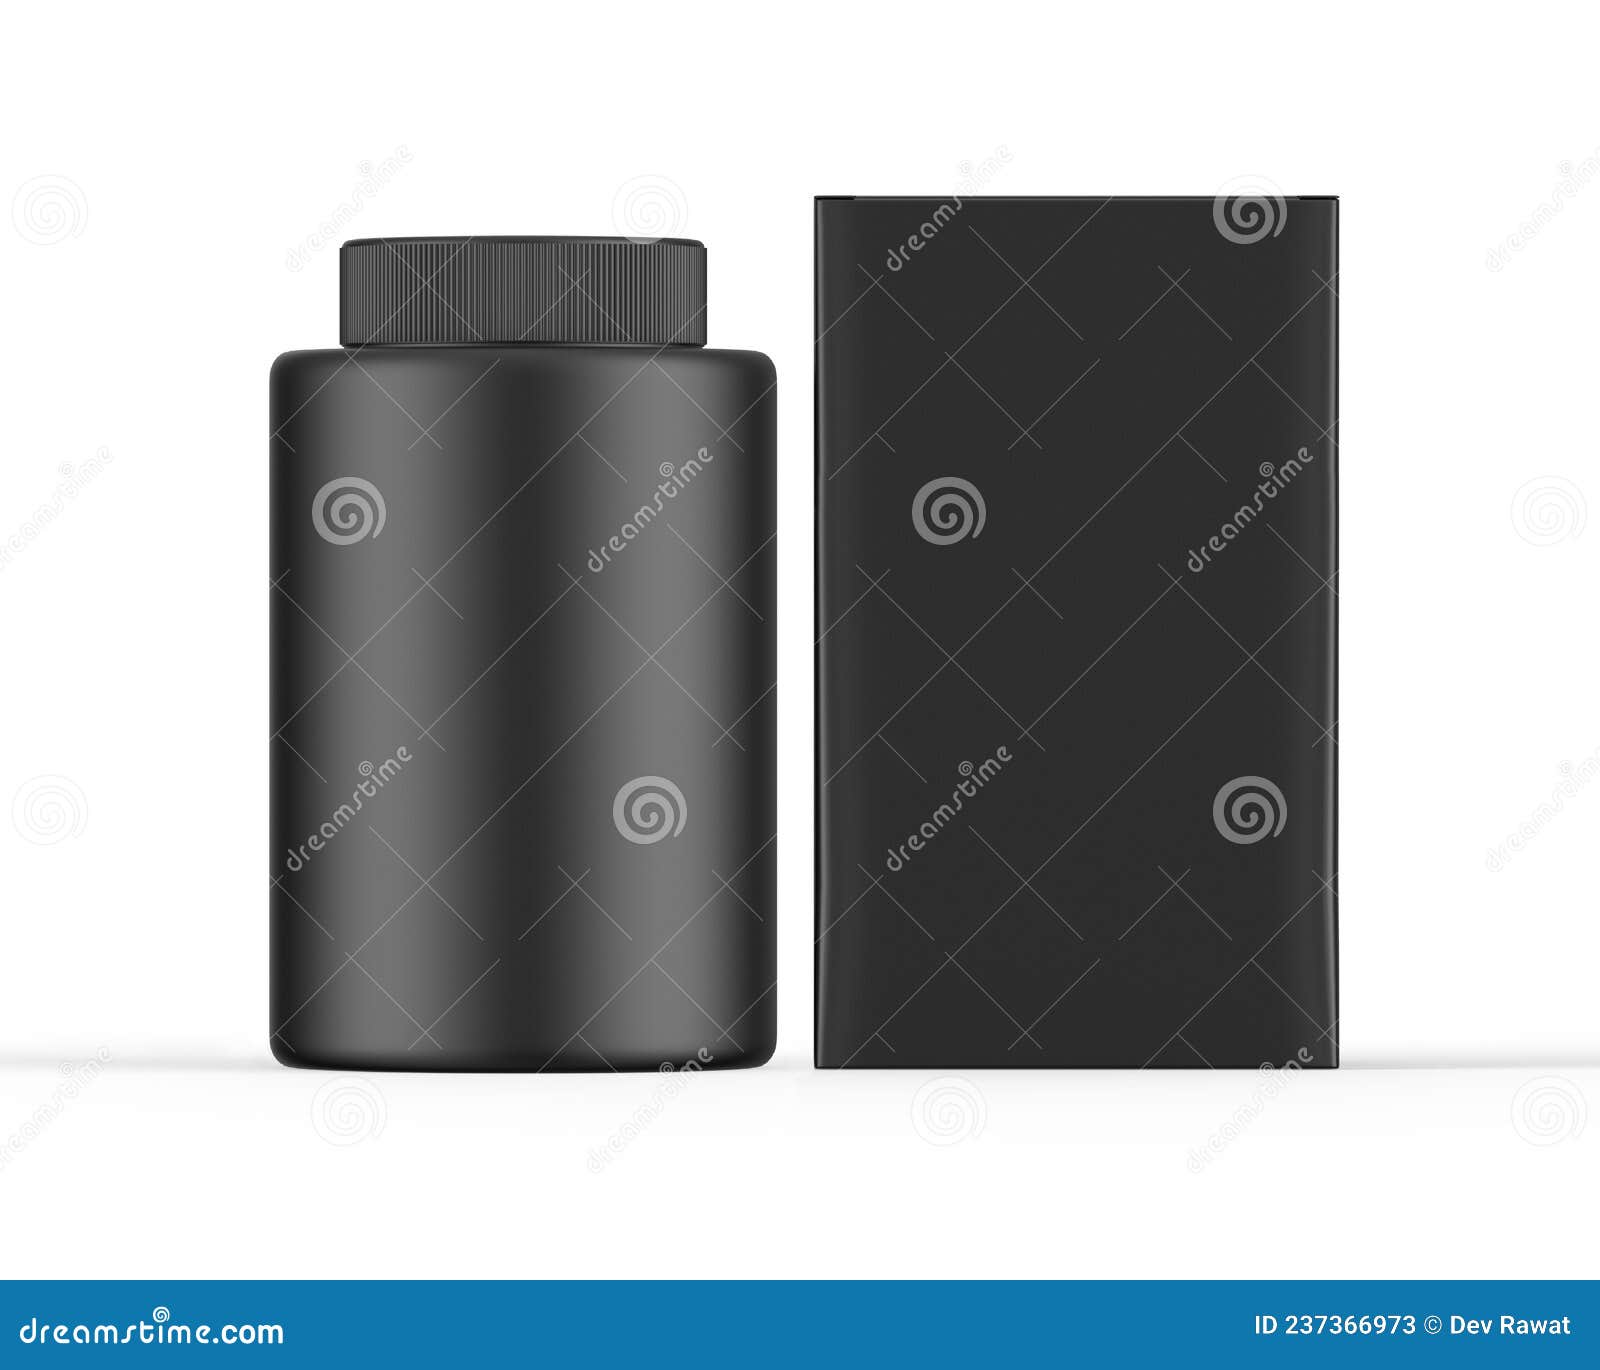 https://thumbs.dreamstime.com/z/black-empty-screw-top-front-protein-gainer-powder-container-tub-jar-mockup-ready-your-design-labels-sport-nutrition-237366973.jpg